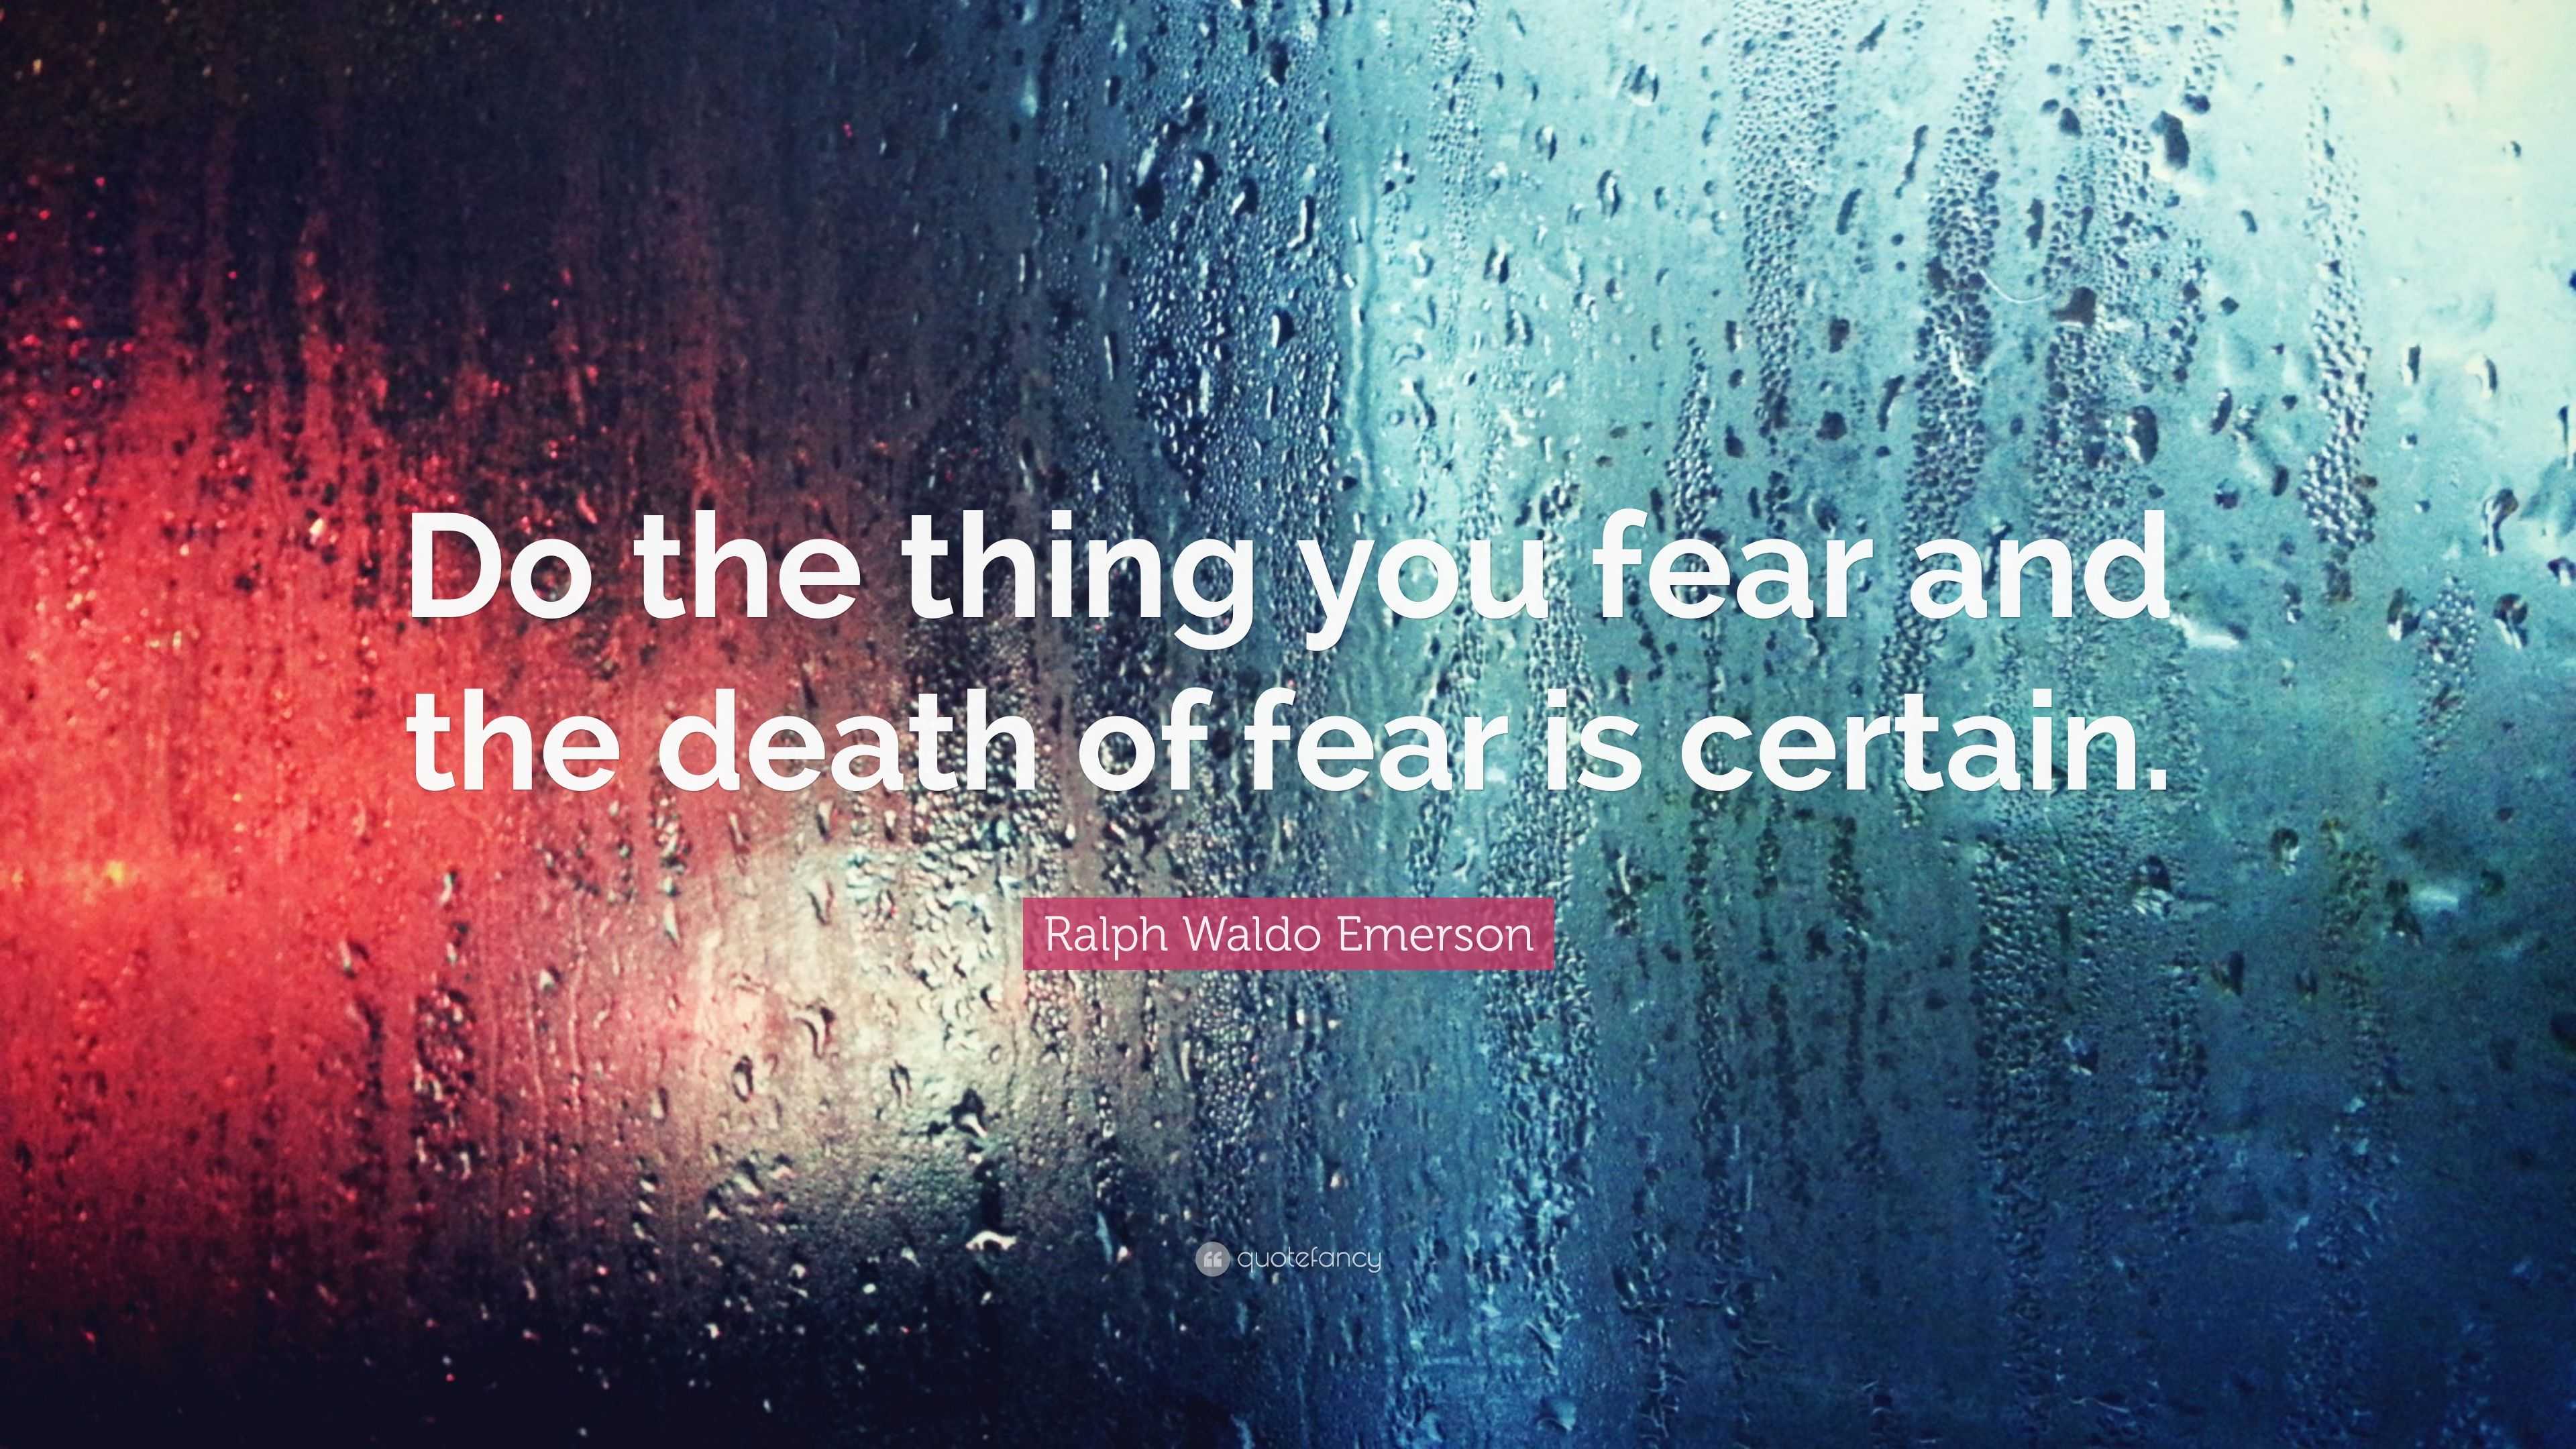 Ralph Waldo Emerson Quote Do The Thing You Fear And The Death Of Fear Is Certain